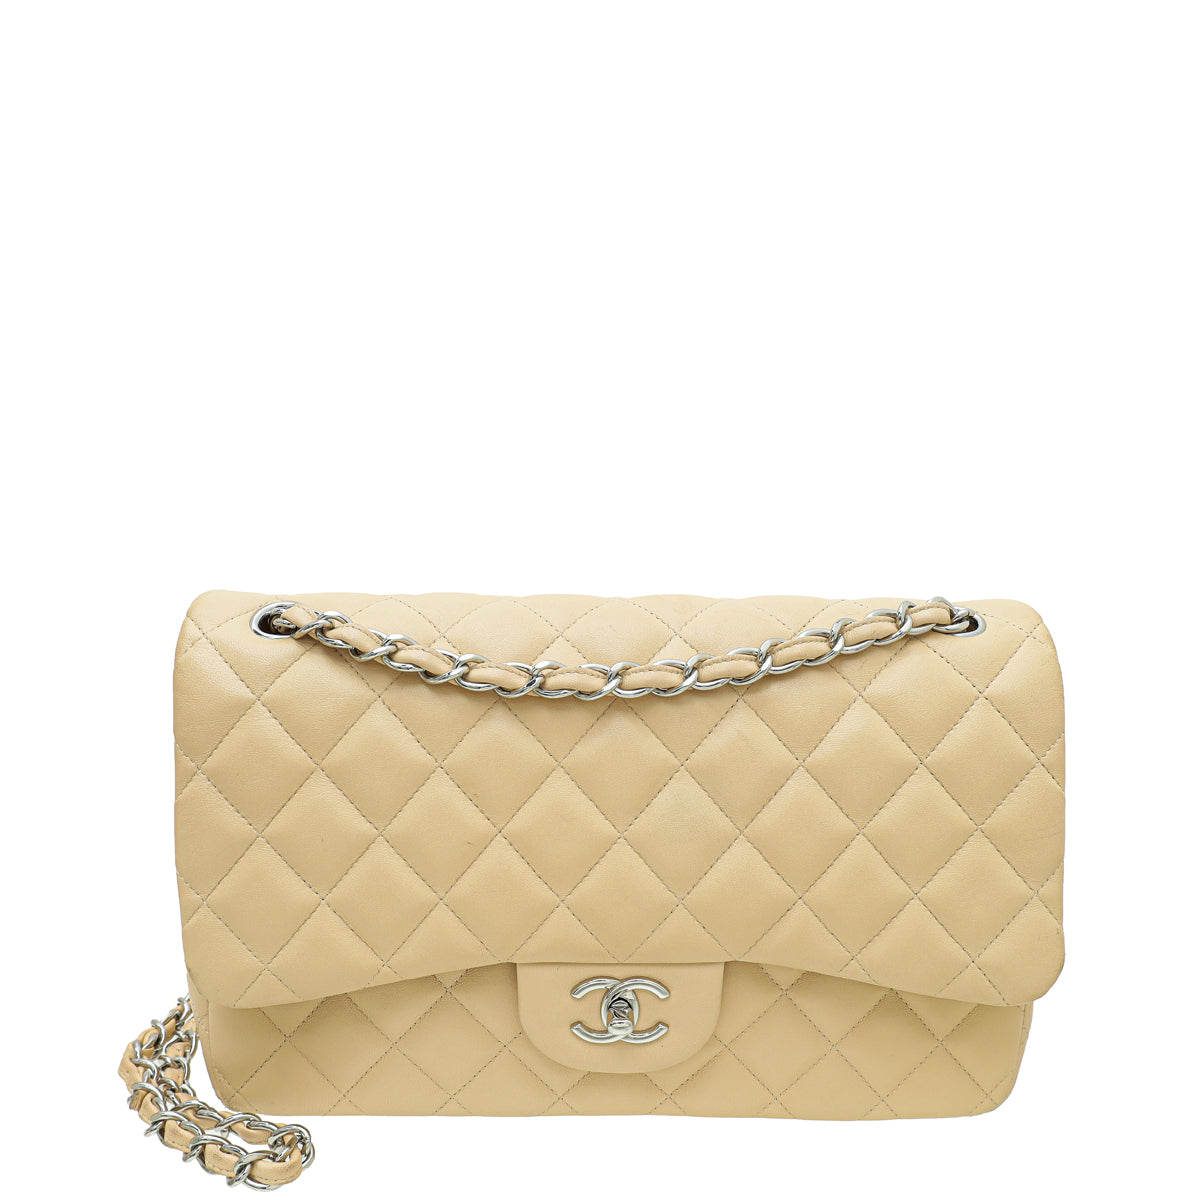 CHANEL, Bags, Chanel Classic Medium Flap Bag In Beige Clair Caviar With  Silver Hardware